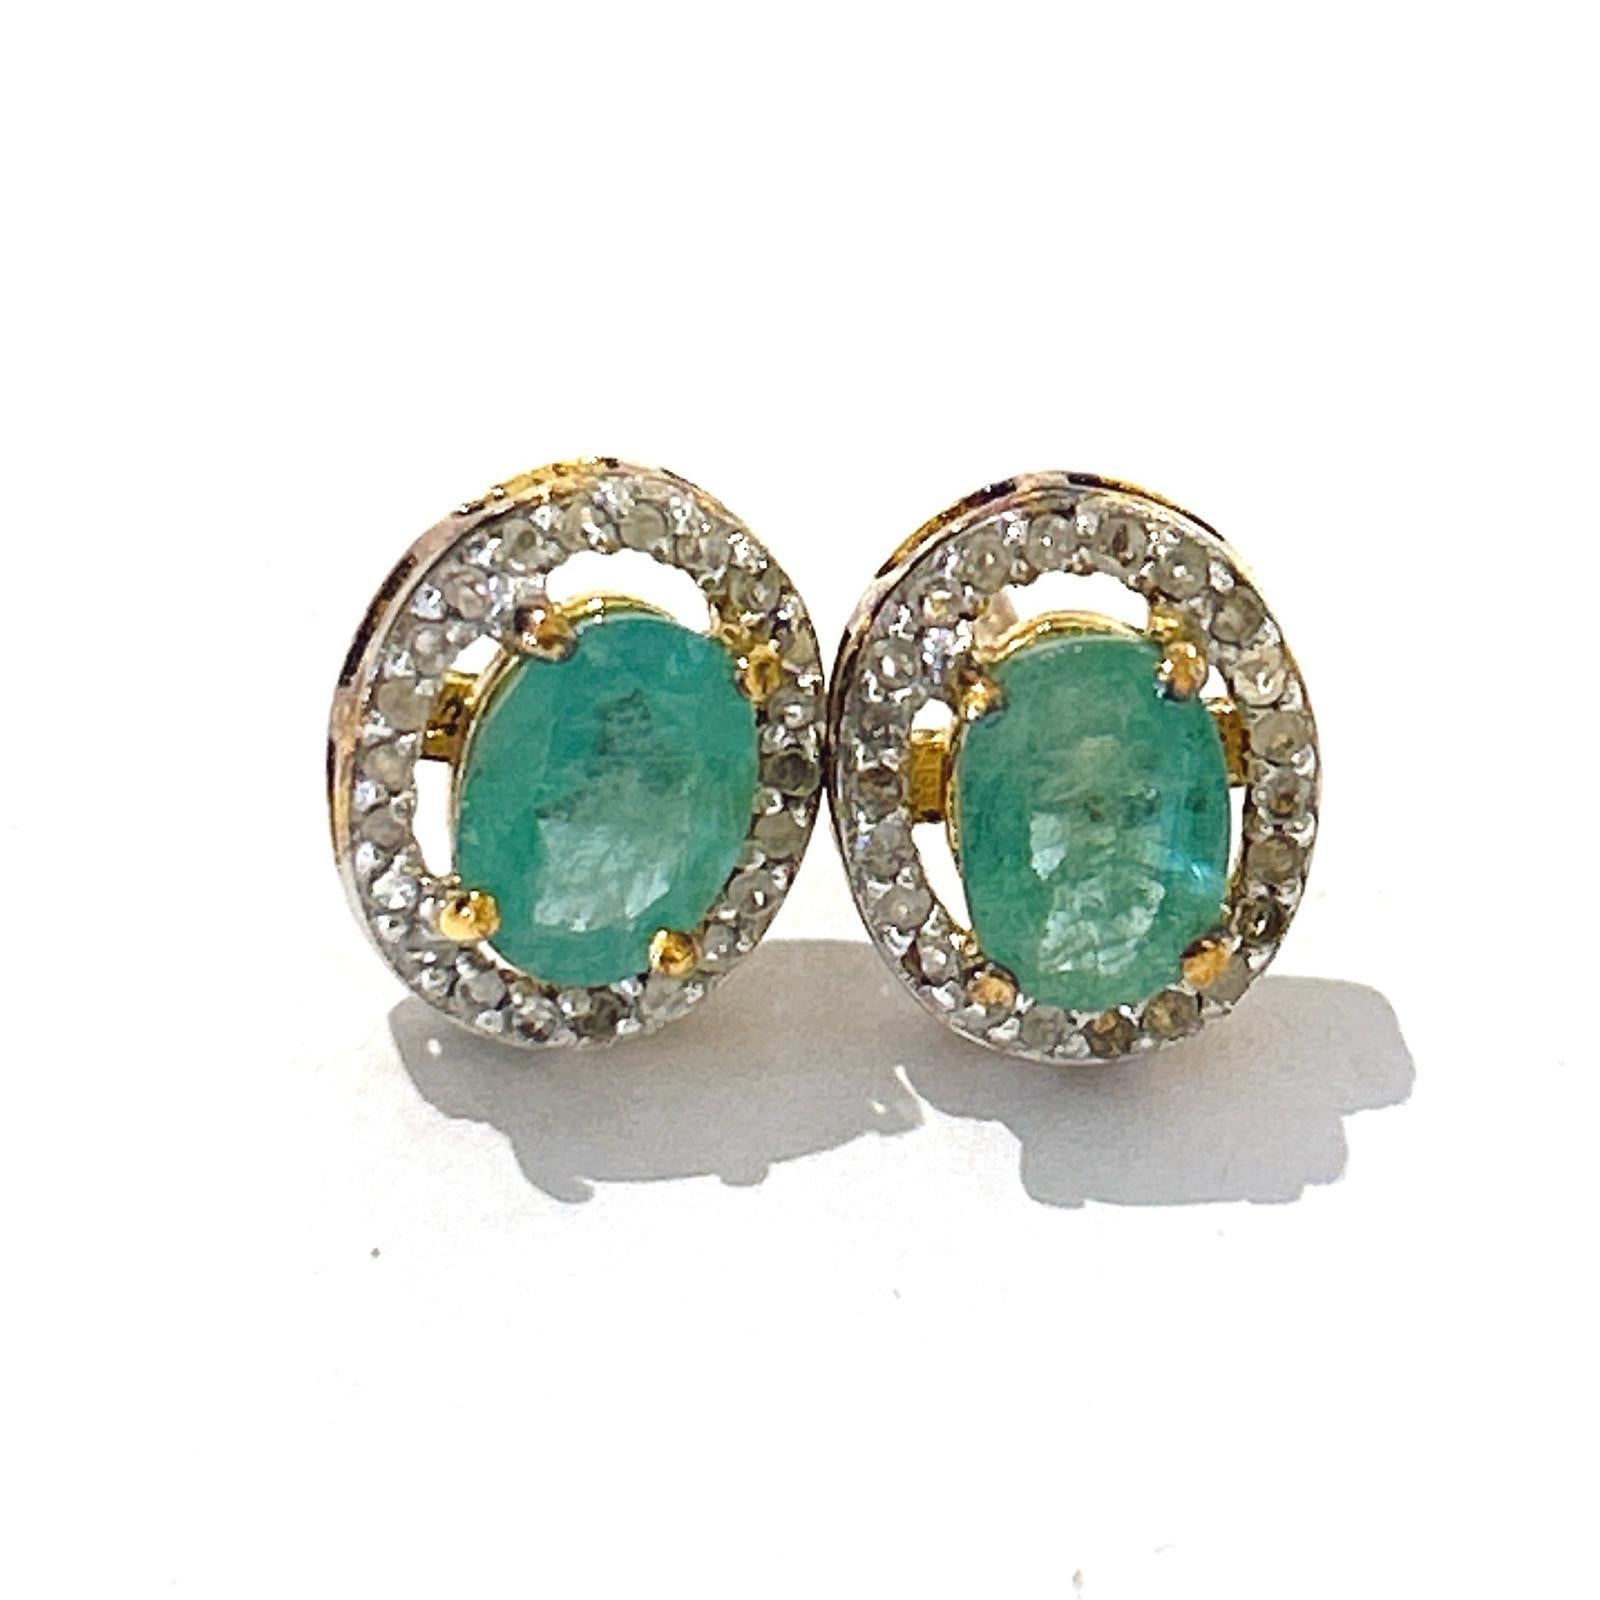 Bochic “Orient” Diamond & Emerald Stud Earrings Set In 18K Gold & Silver 

Single cut natural gray diamonds - 1 carat 
Oval shape natural emeralds - 2 carats 

The earrings from the 